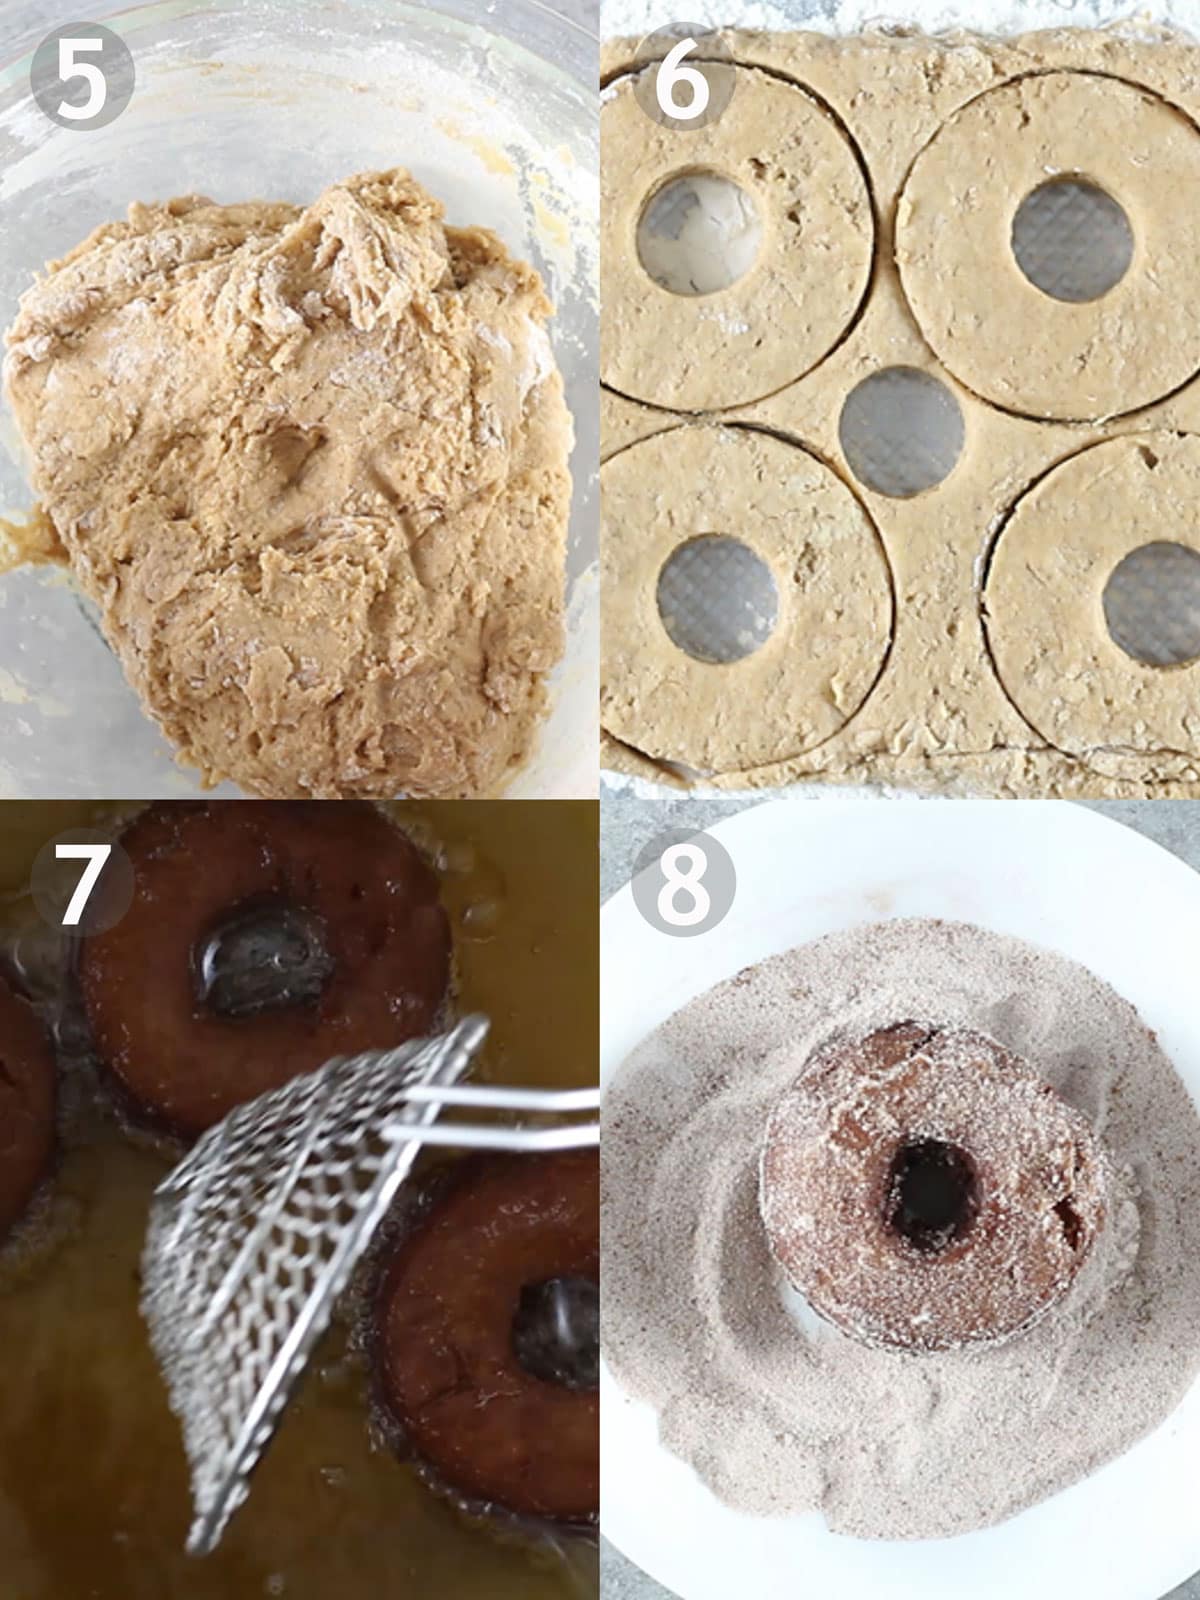 Steps to making donuts including, rolling and punching out dough, deep frying and coating in cinnamon sugar.